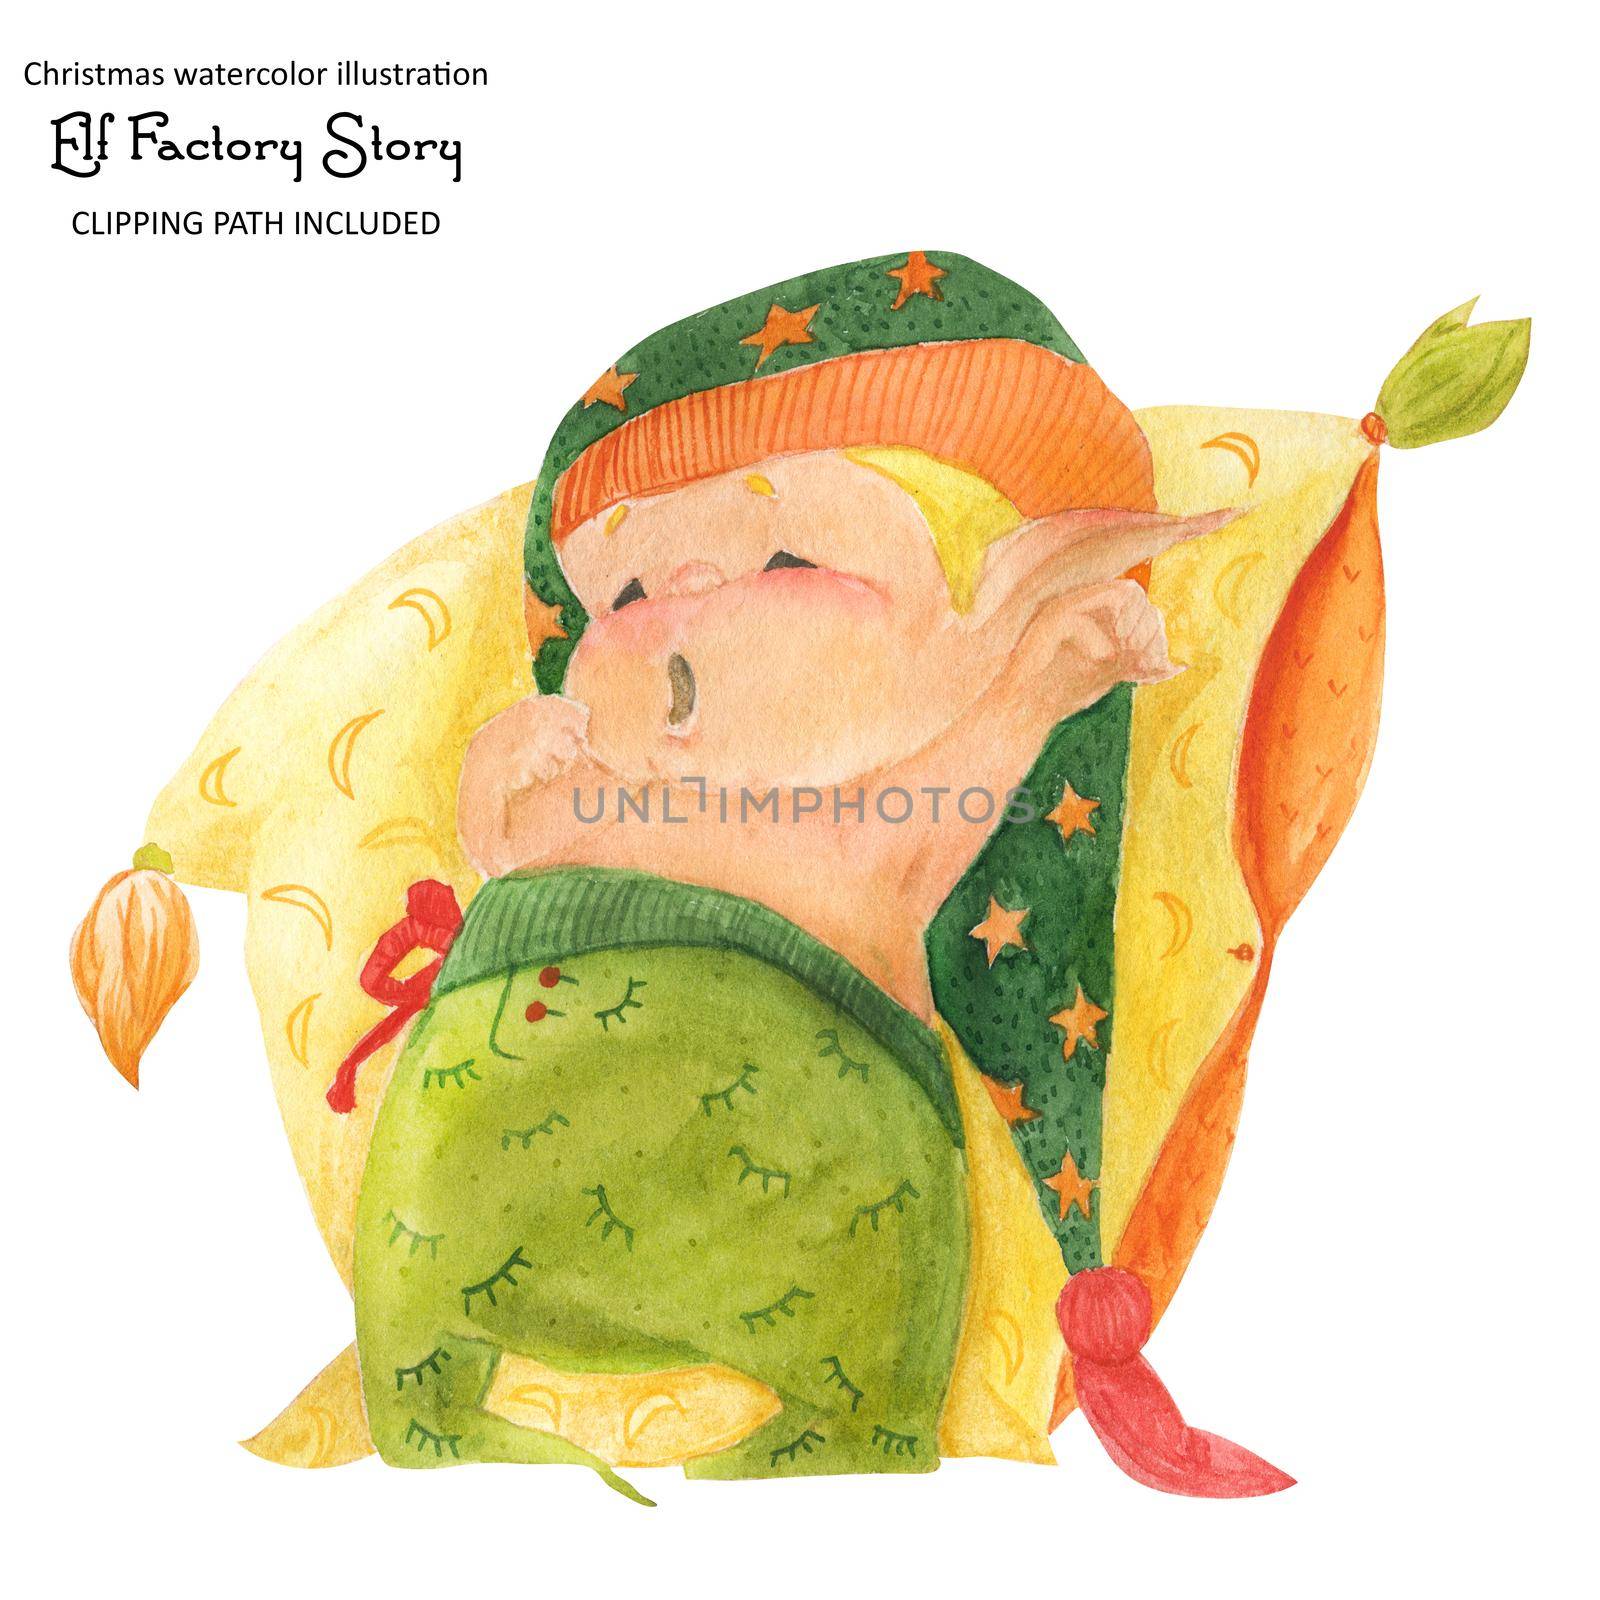 Christmas elf story, elf-baby go to sleep, , isolated watercolor and clipping path